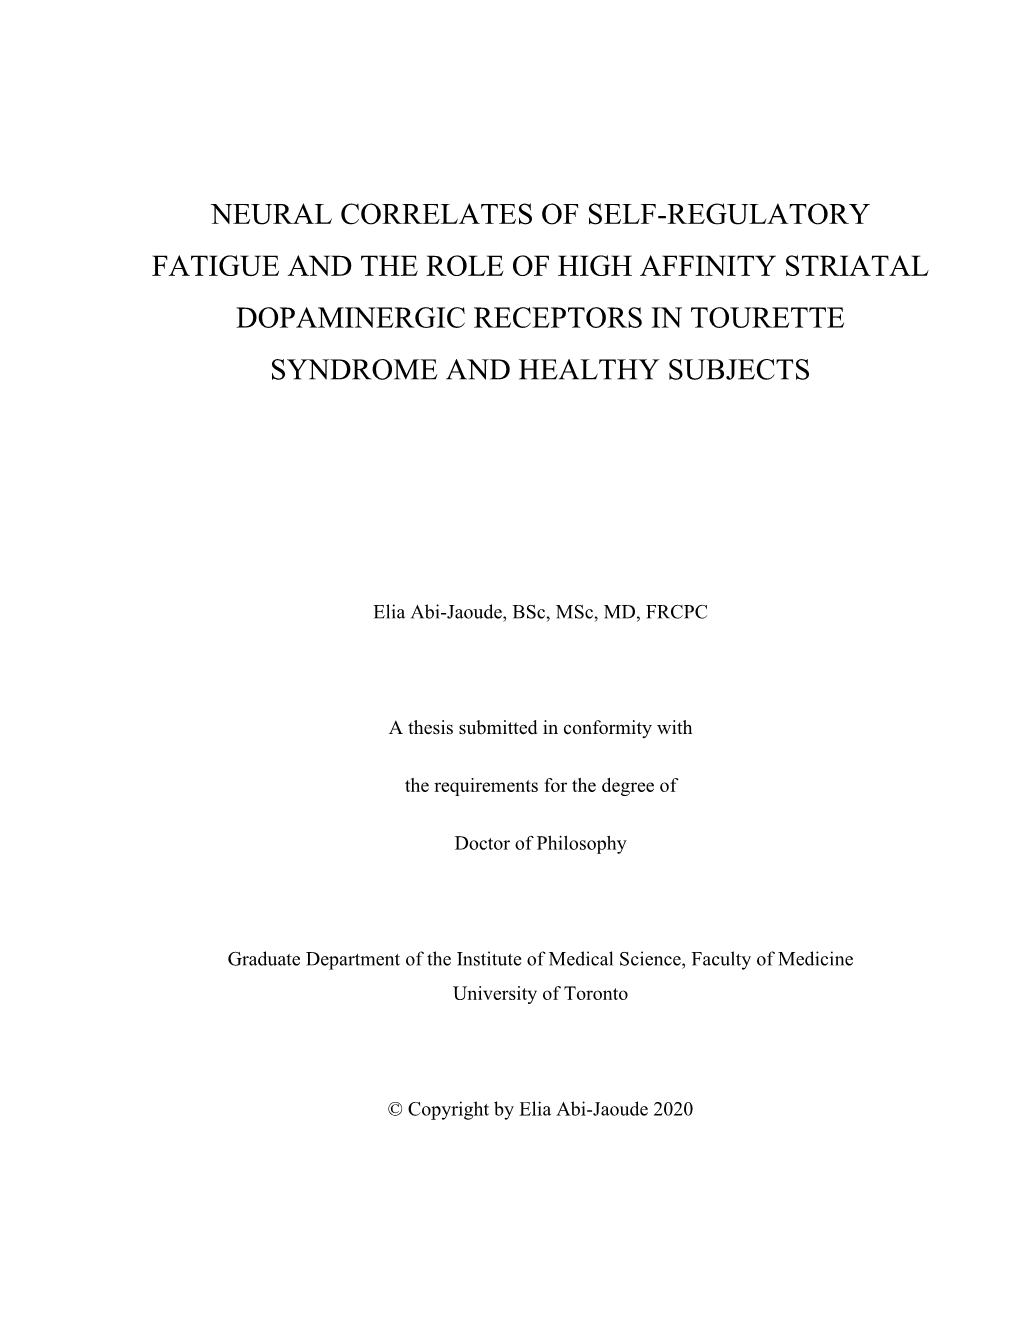 Neural Correlates of Self-Regulatory Fatigue and the Role of High Affinity Striatal Dopaminergic Receptors in Tourette Syndrome and Healthy Subjects